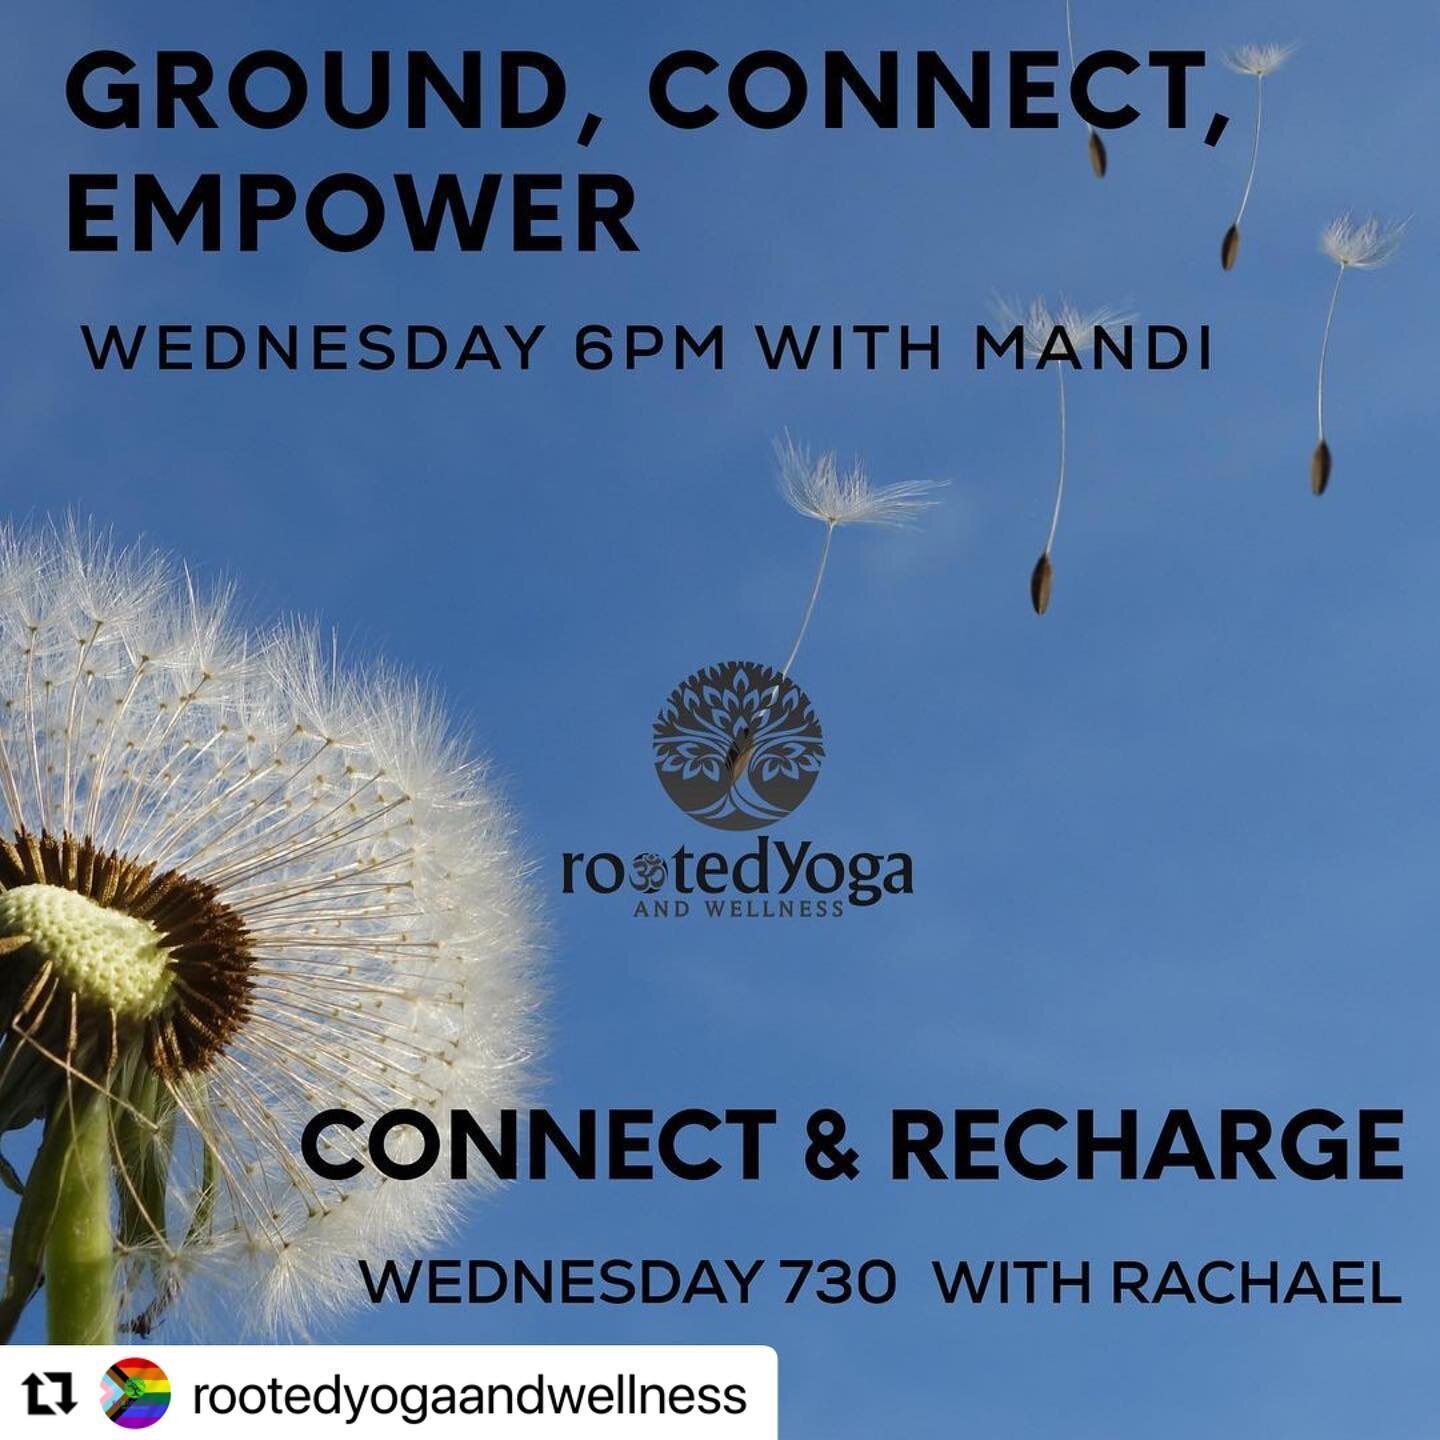 #Repost @rootedyogaandwellness with @use.repost
・・・
move the body ✨free the soul✨ease the mind✨open the heart✨

registration link in bio 

donate venmo @rootedyogaandwellness 

we are a 501(c)(3) trauma informed wellness studio rooted in healing. we 